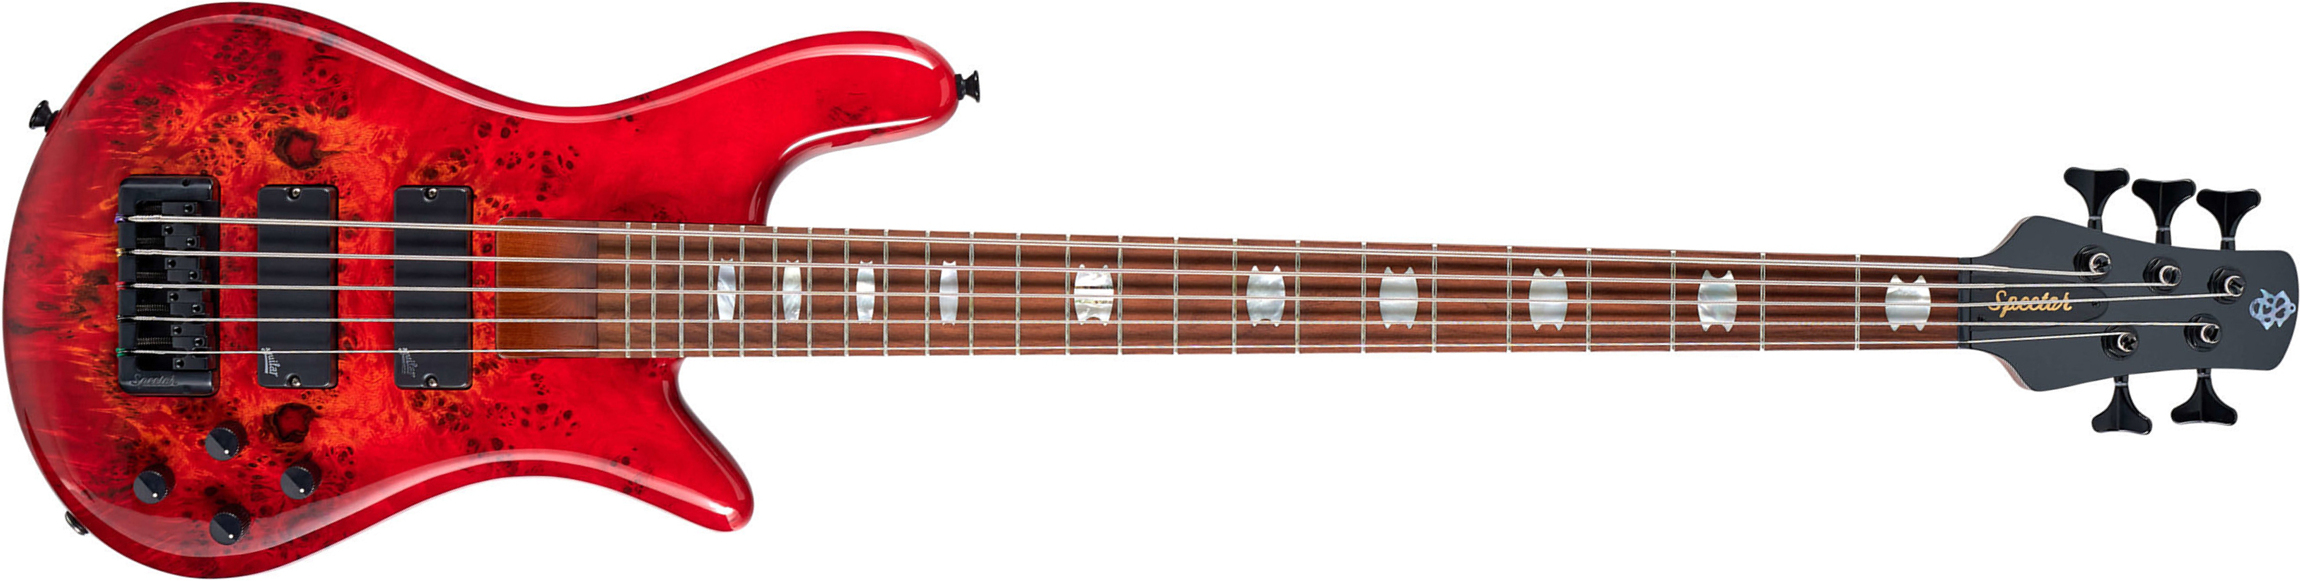 Spector Ns Eurobolt 5c Active Aguilar Mn - Inferno Red Gloss - Basse Électrique Solid Body - Main picture